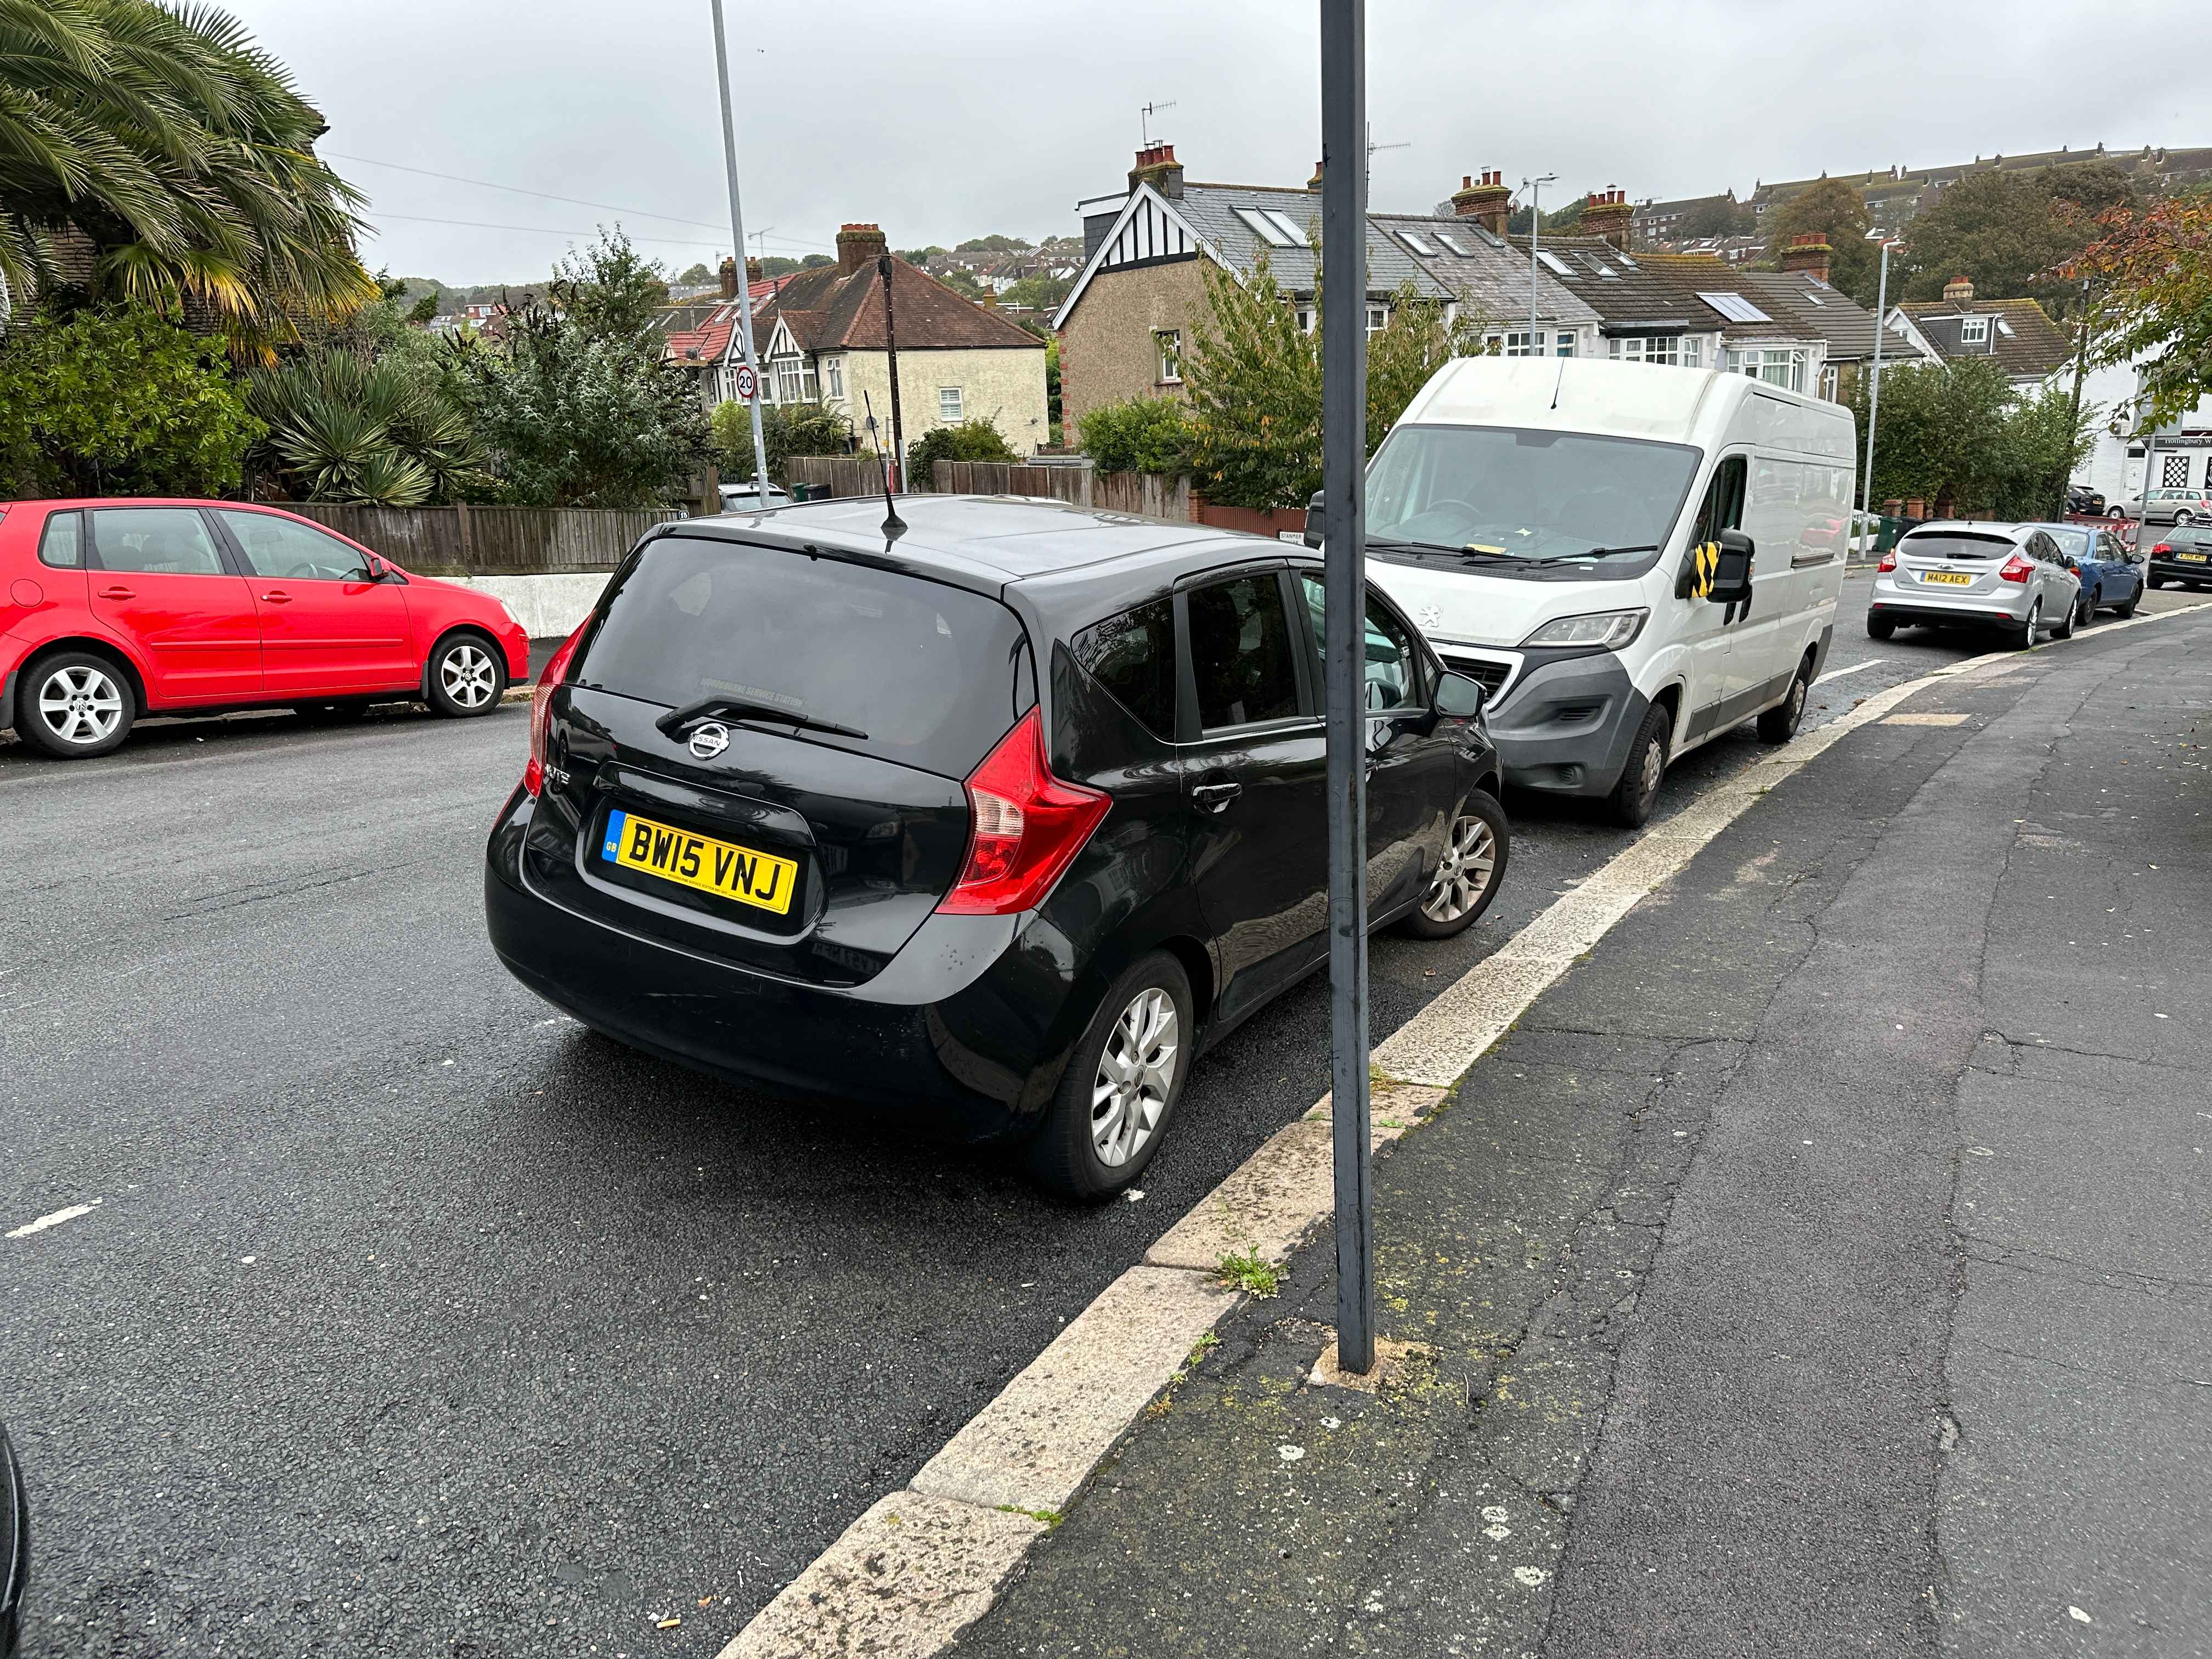 Photograph of BW15 VNJ - a Black Nissan Note parked in Hollingdean by a non-resident who uses the local area as part of their Brighton commute. The tenth of fifteen photographs supplied by the residents of Hollingdean.